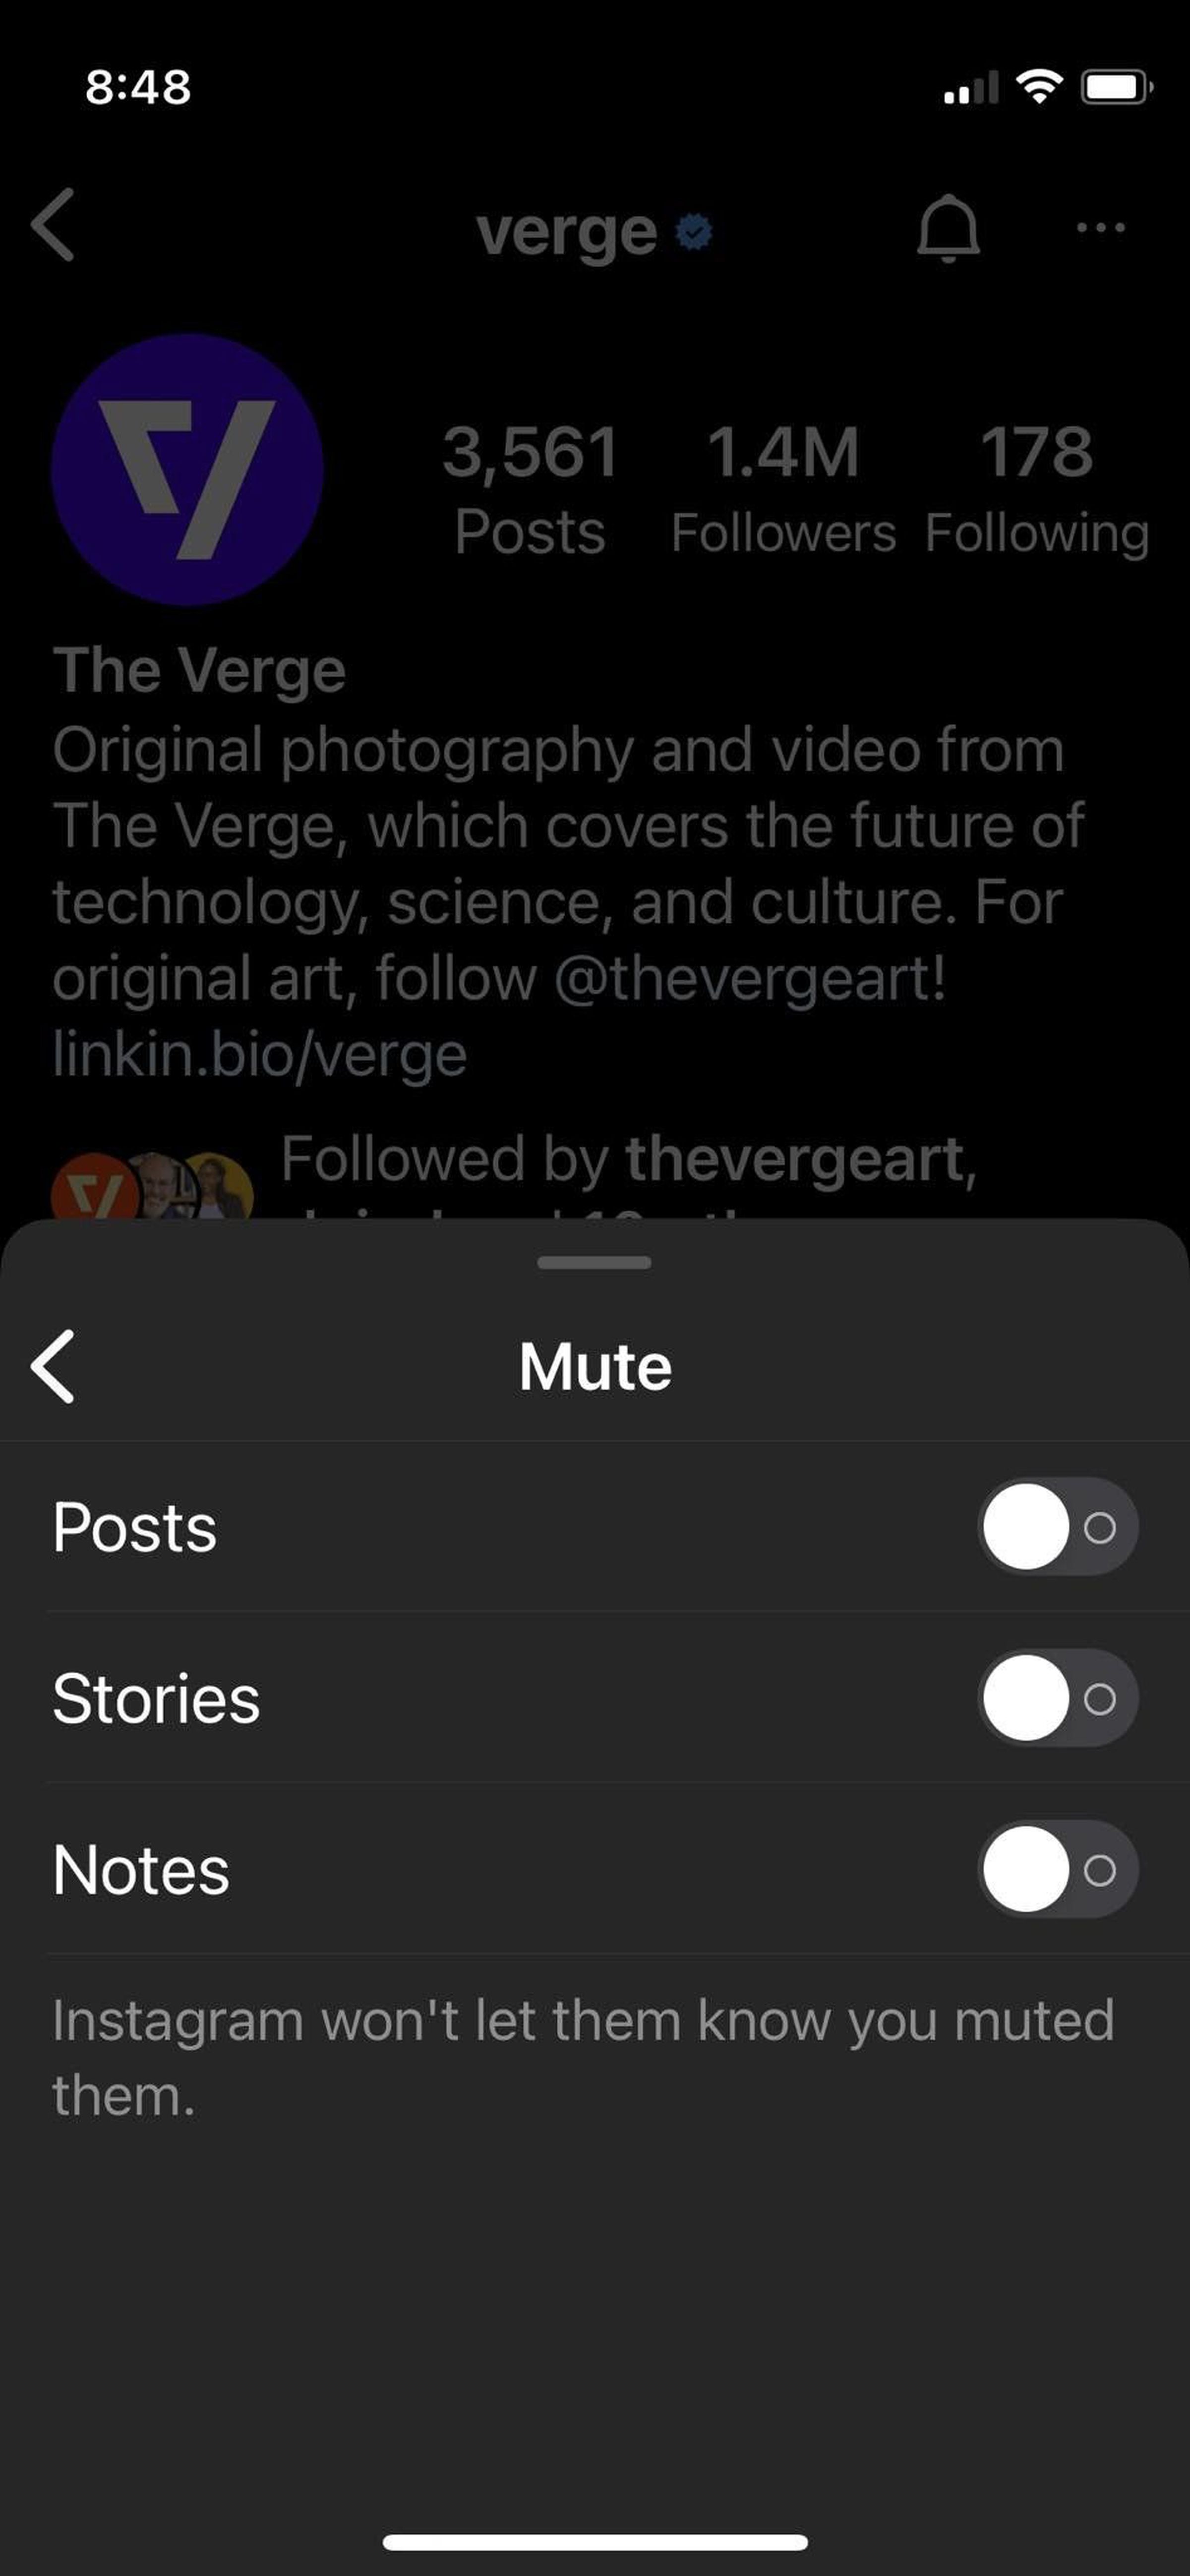 Phone screen with options to mute notes, posts and stories on Instagram.